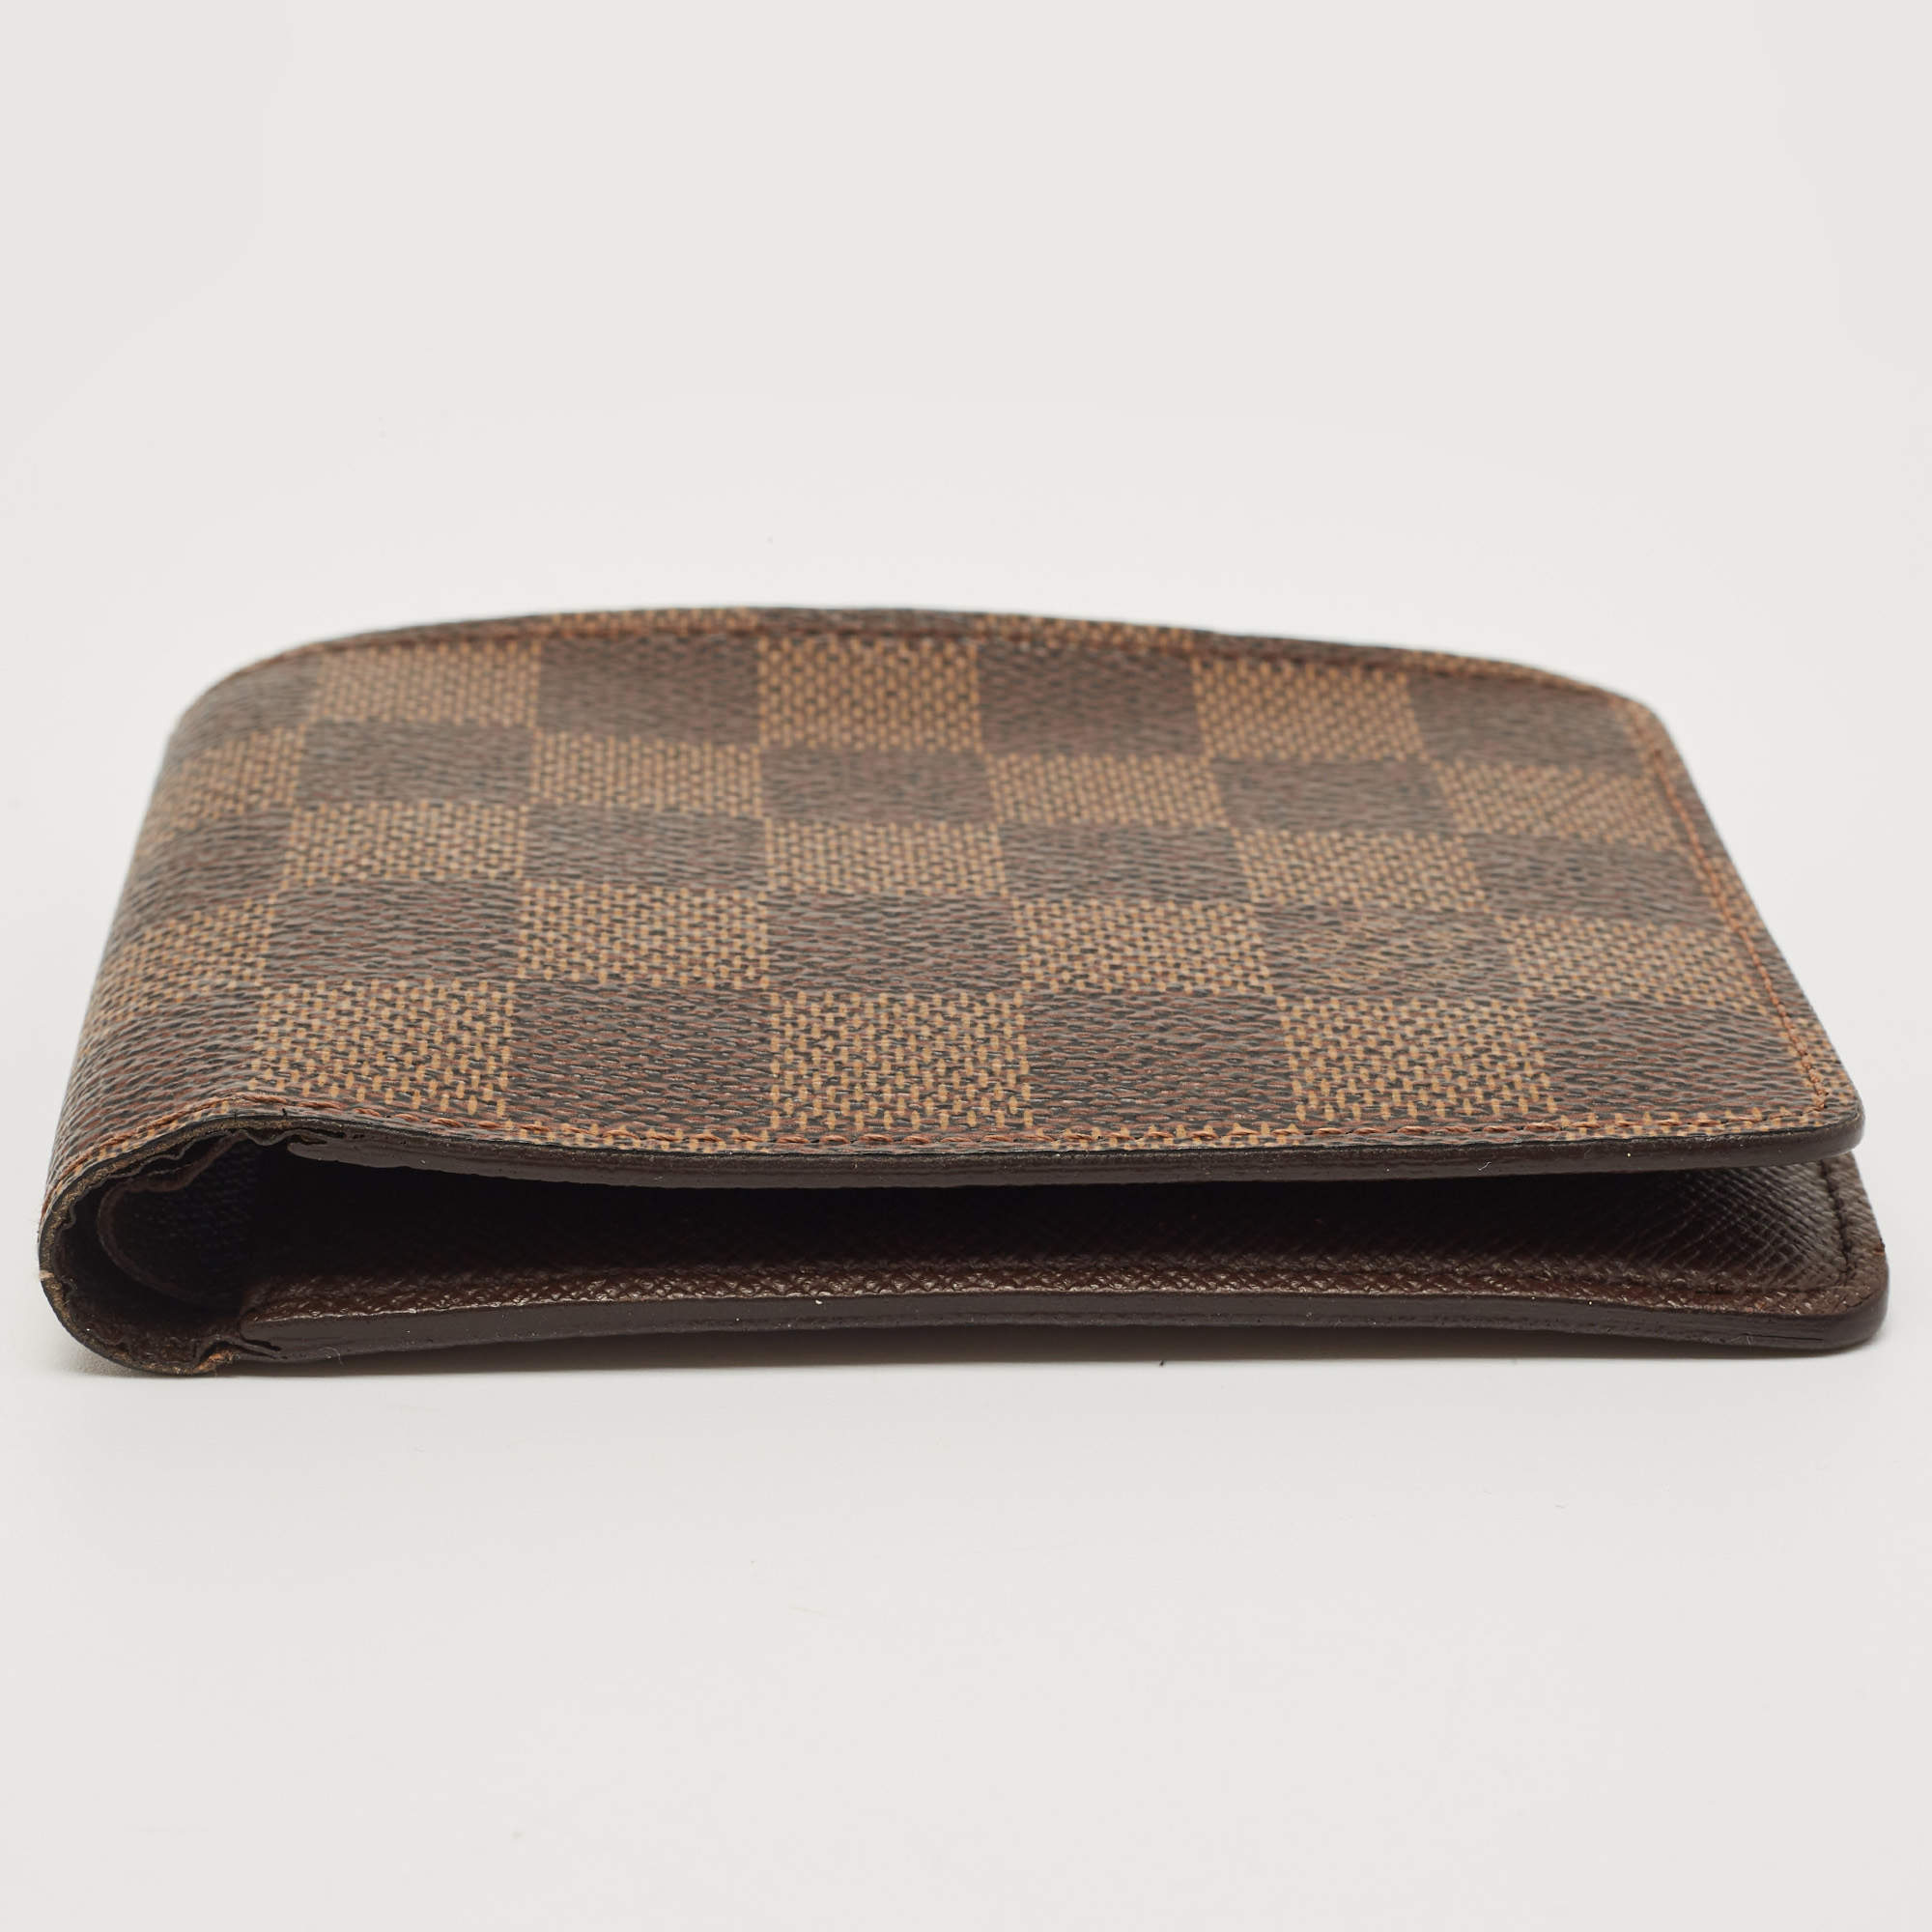 Slim Purse Damier Ebene Canvas - Wallets and Small Leather Goods